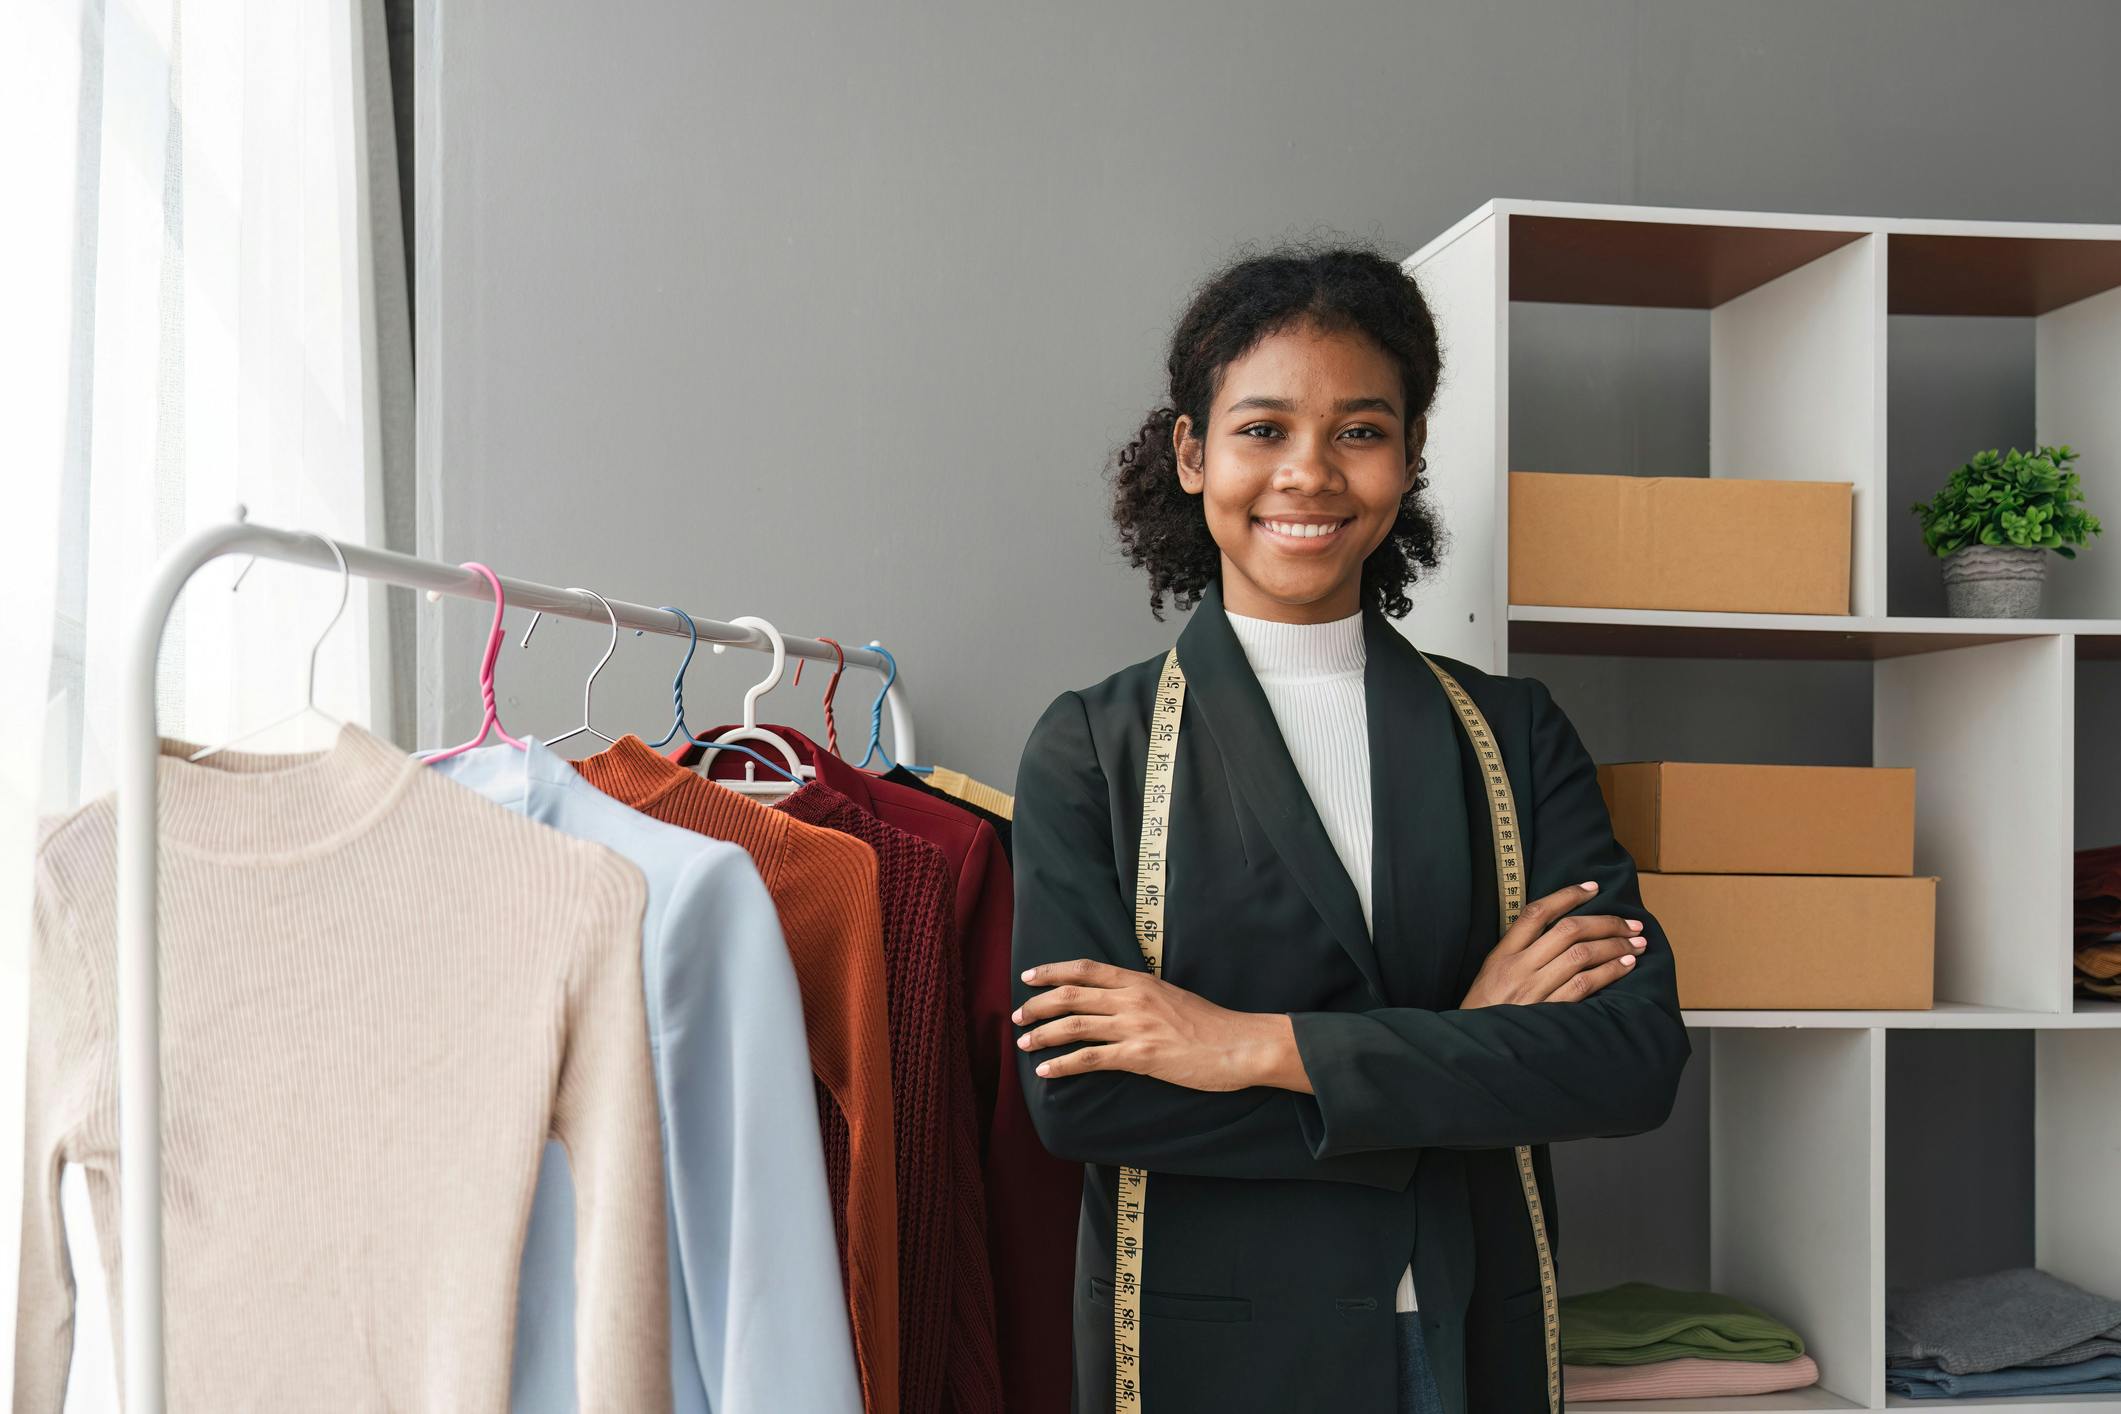 Student standing in front of a rack of clothing with a measuring tape draped over her neck